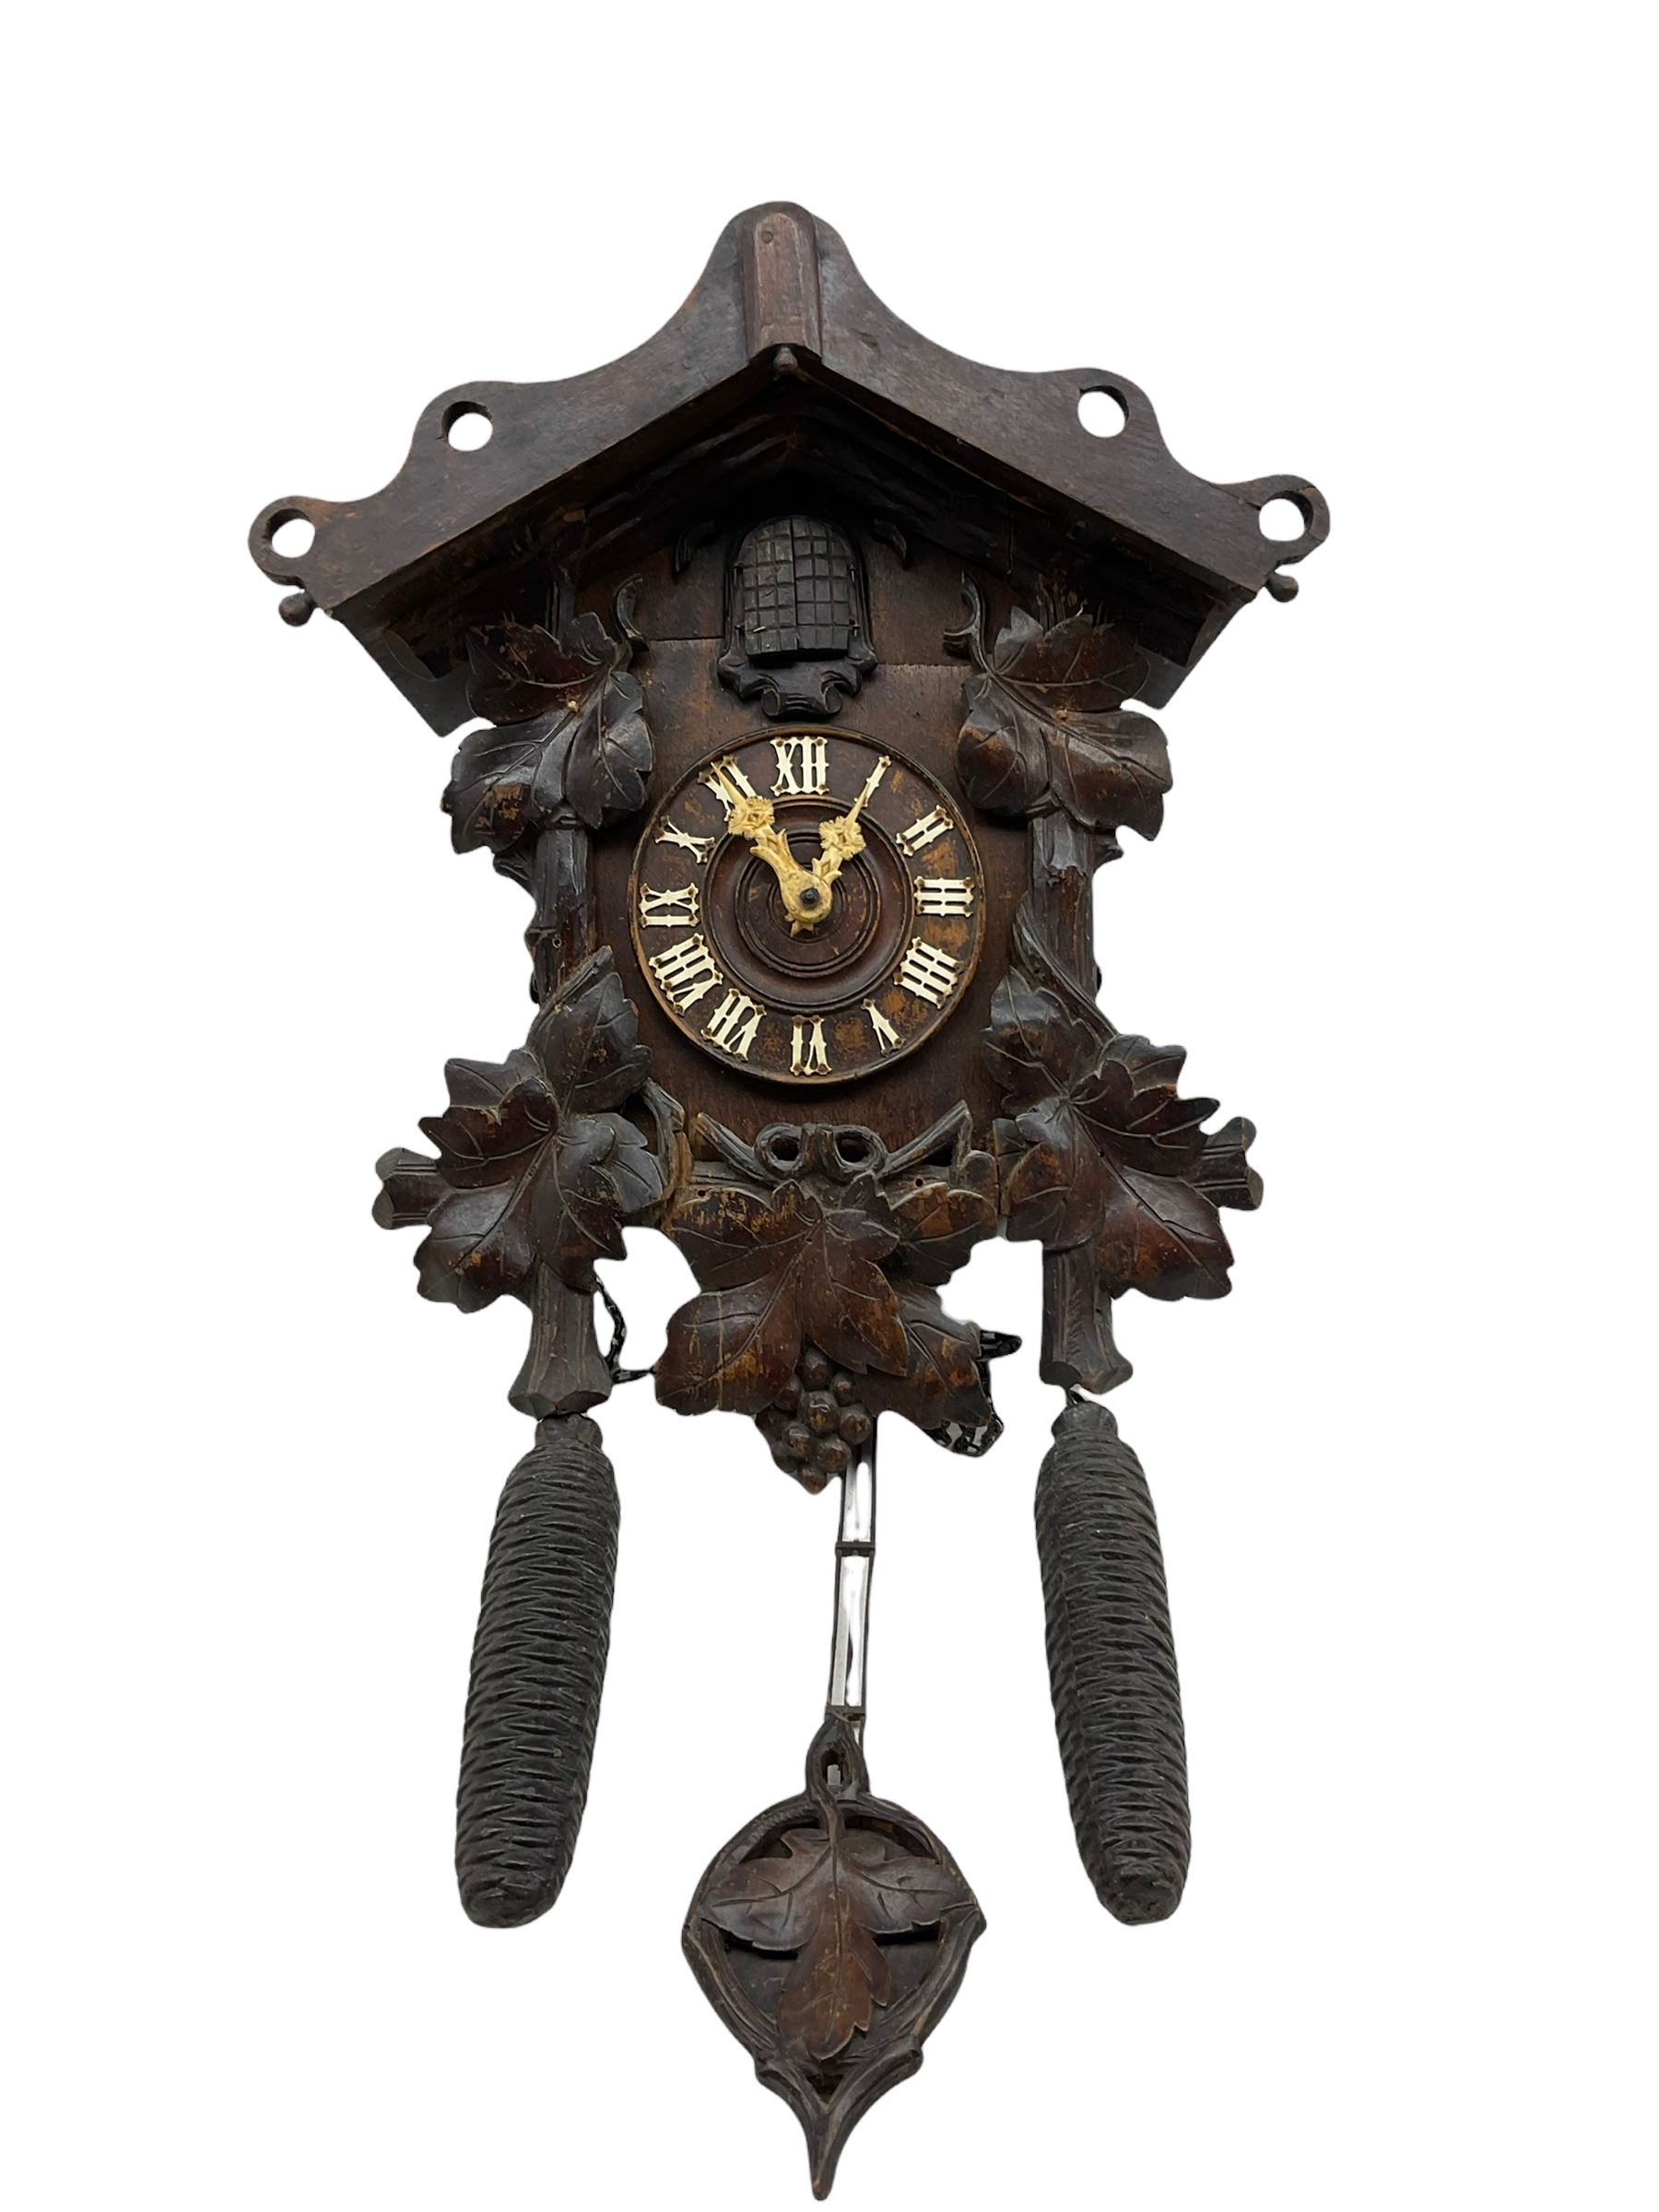 An early 19th century German Black Forest cuckoo clock in a carved oak case